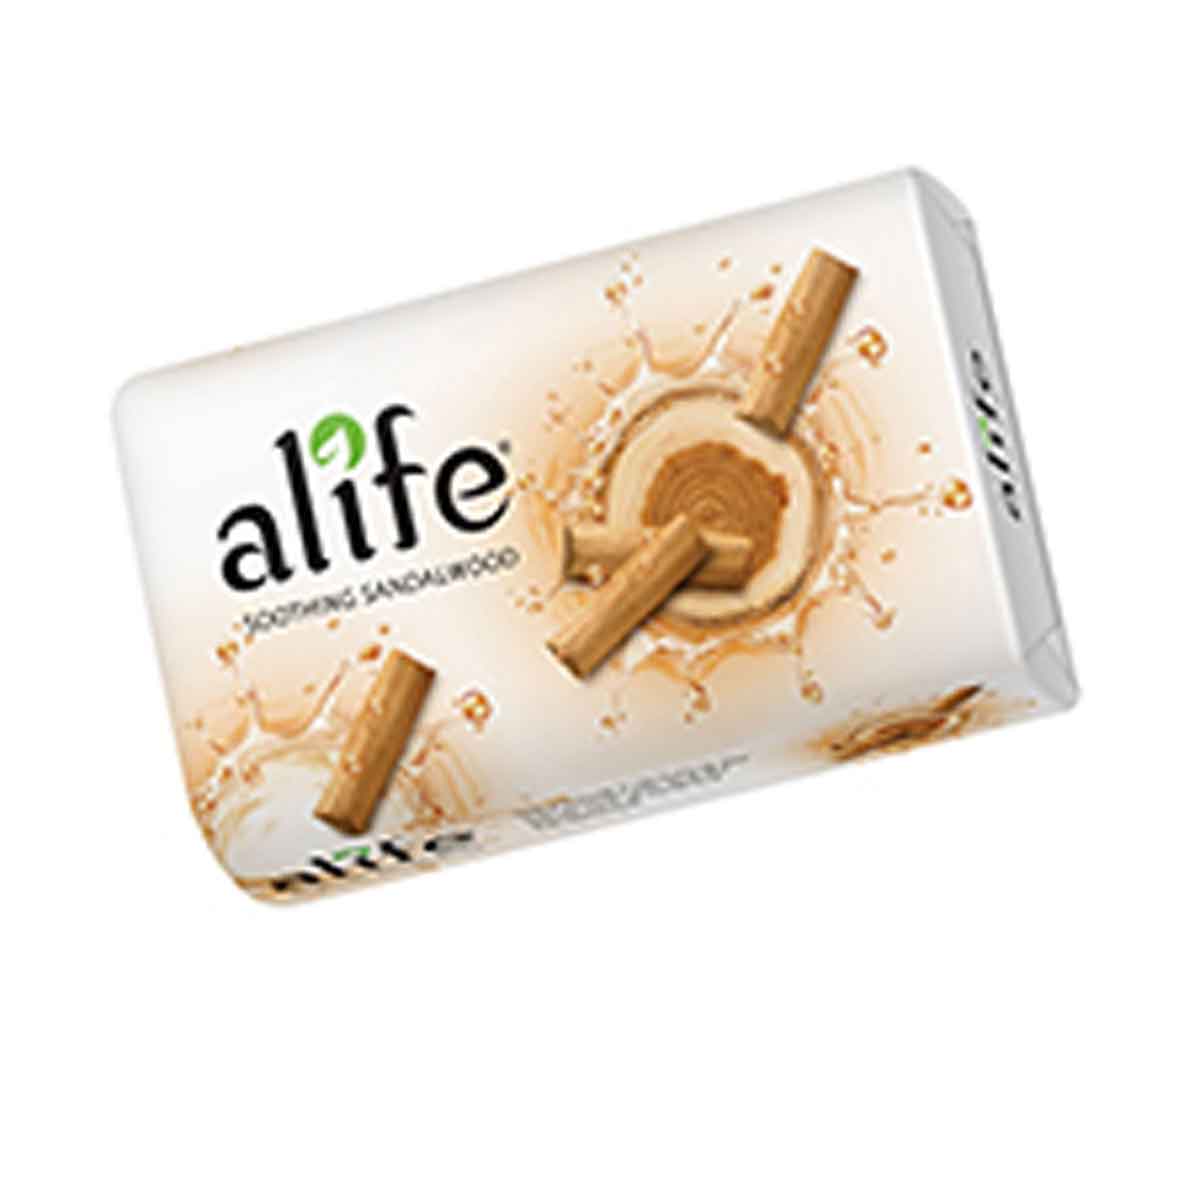 FORTUNE ALIFE SMOOTHING SANDAL SOAP - 4 X 75 GMS